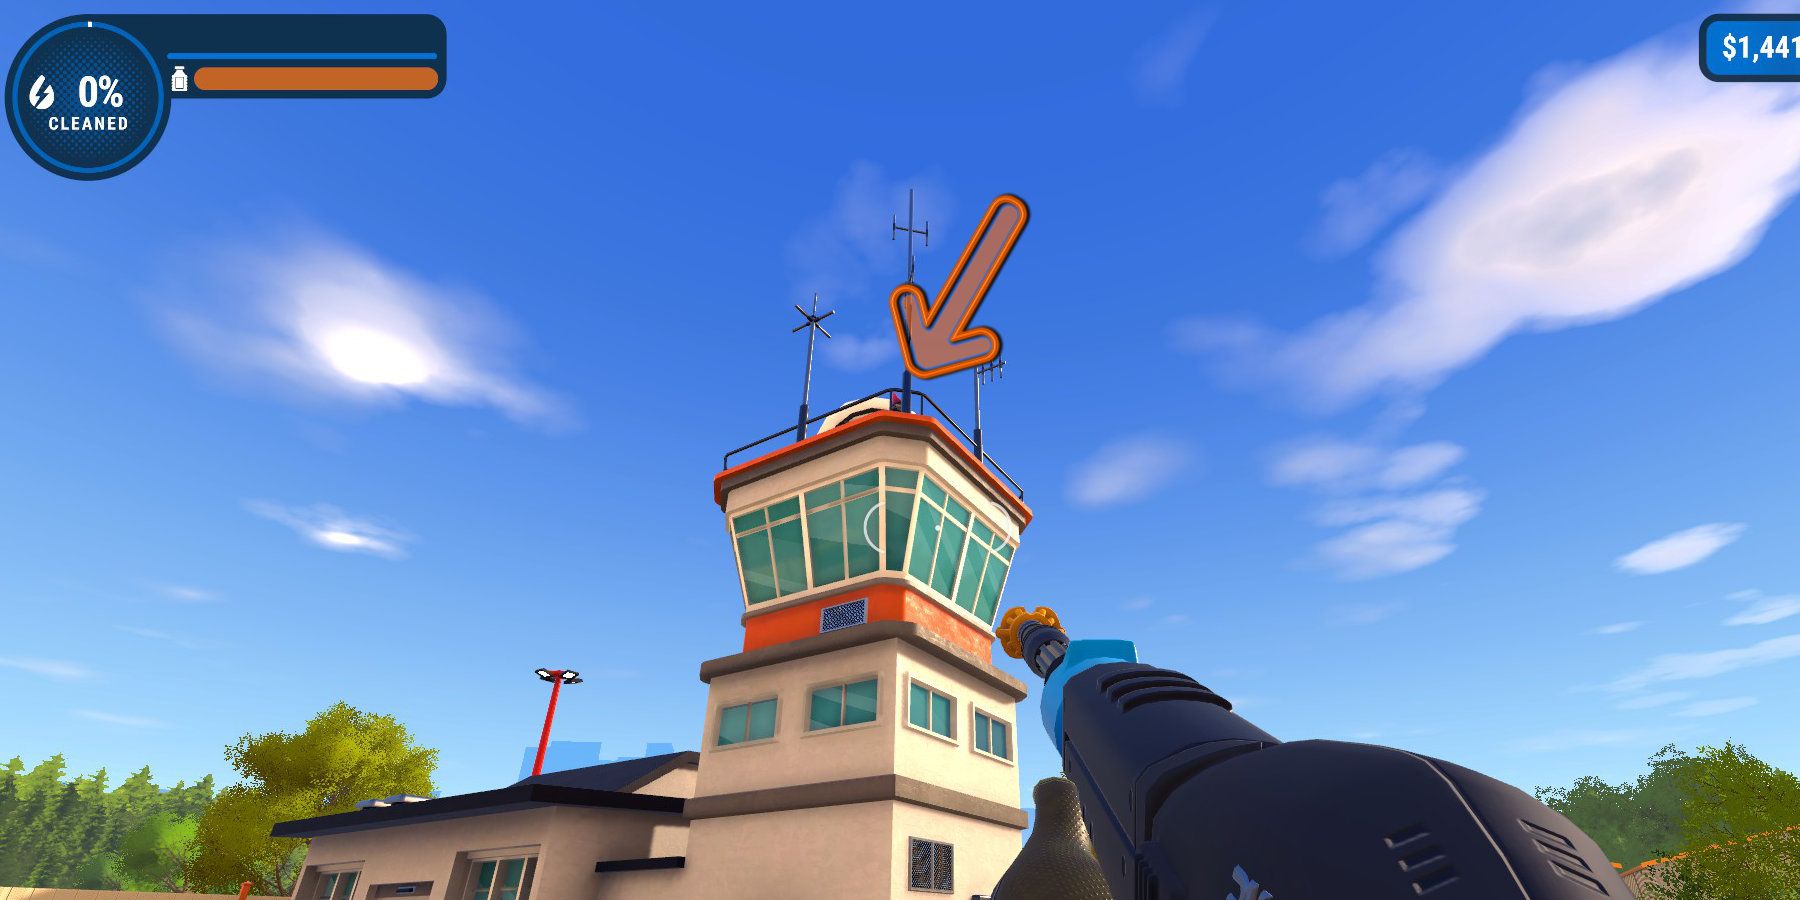 A garden gnome on top of an air traffic control tower, highlighted by an arrow.